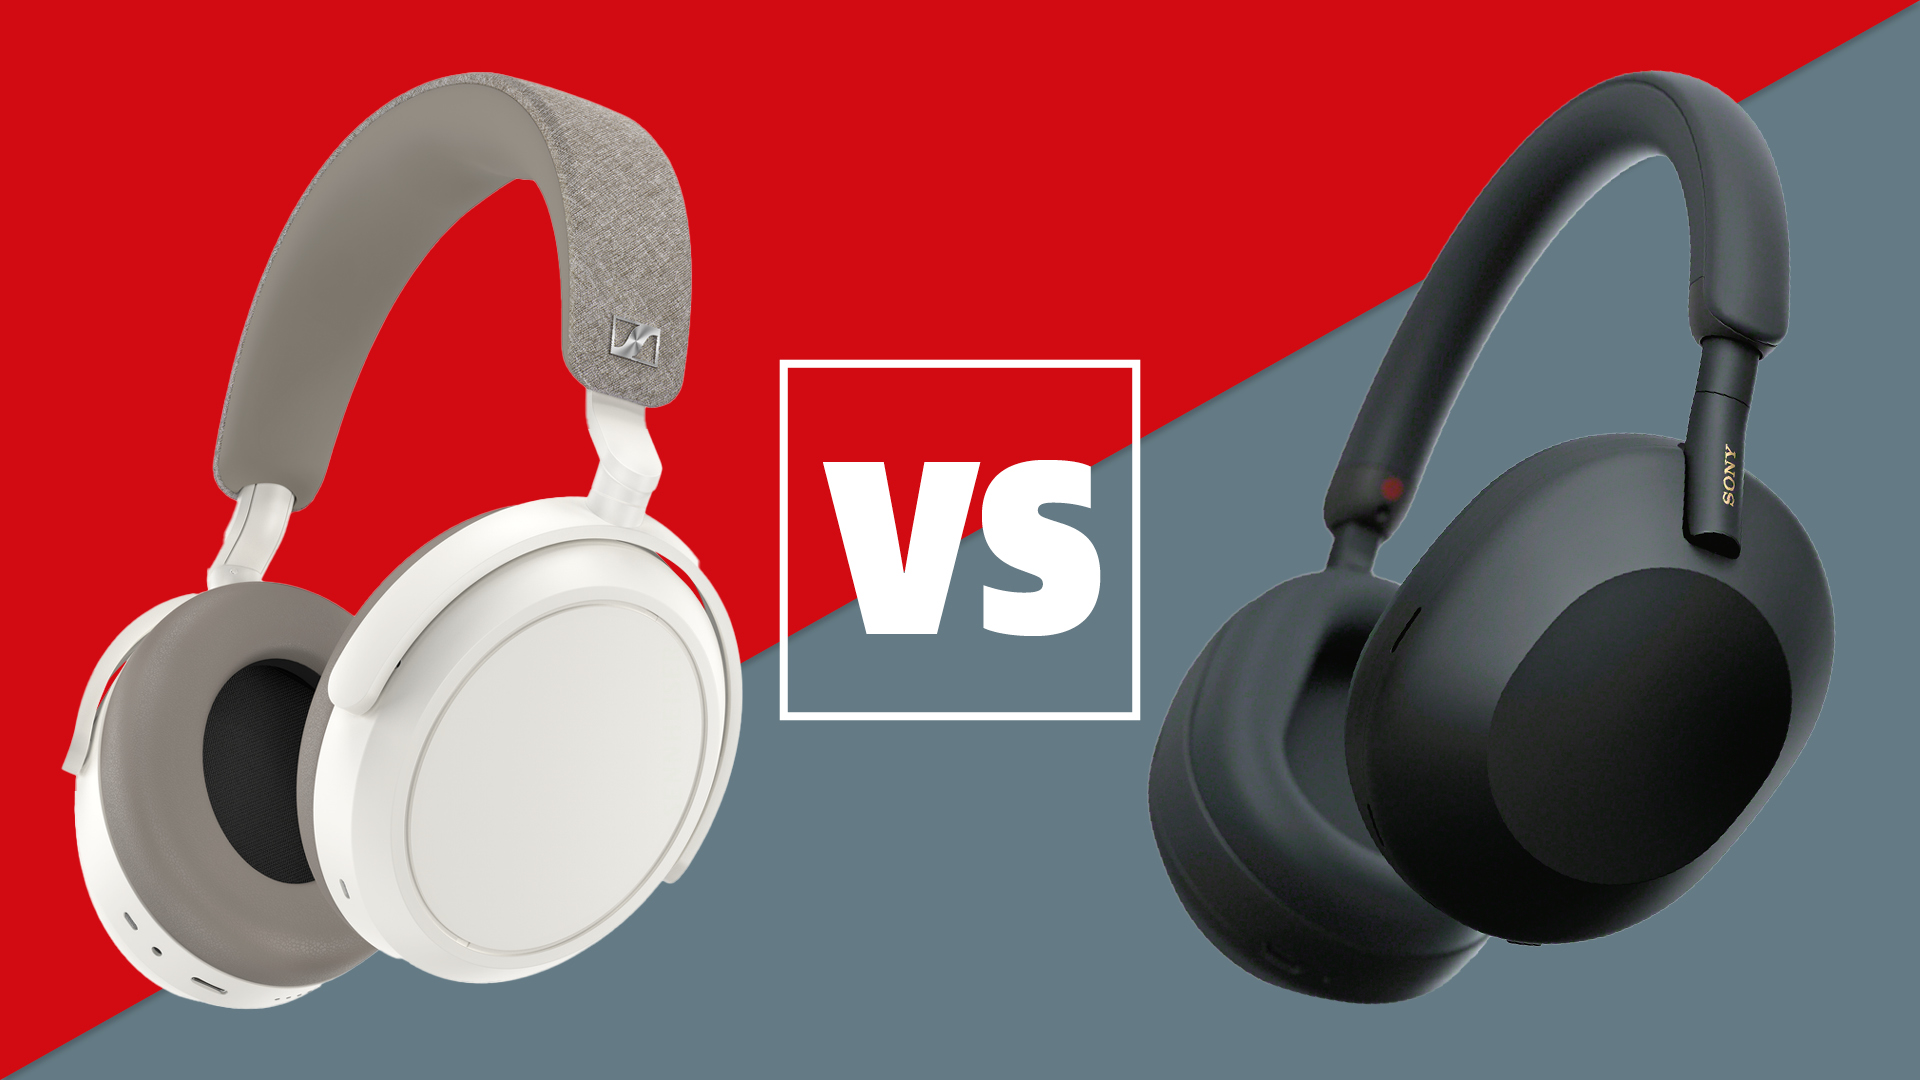 Sony XM4 vs XM5 Noise-Cancelling Headphones: Which Is Better